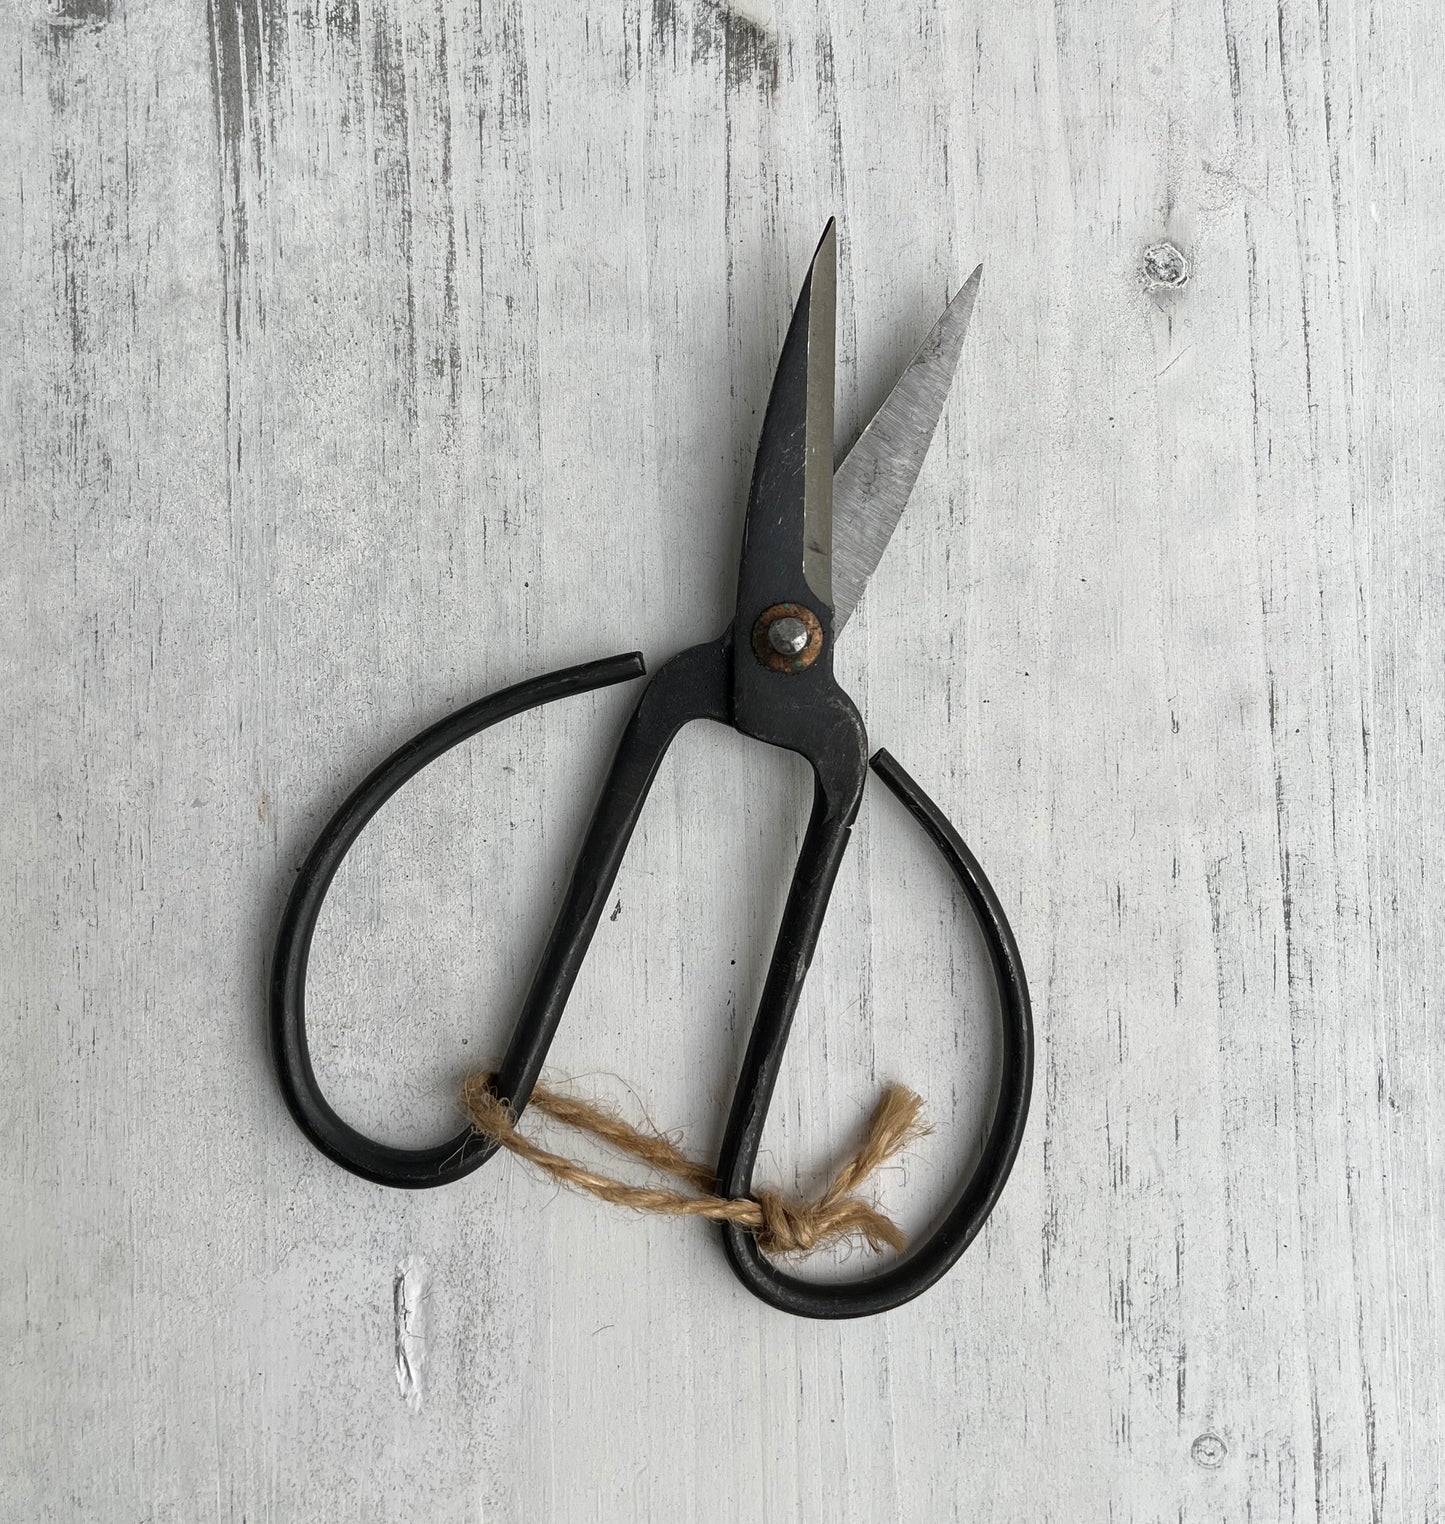 Medieval Iron Scissors - Authentic Hand Forged Antique Accessory